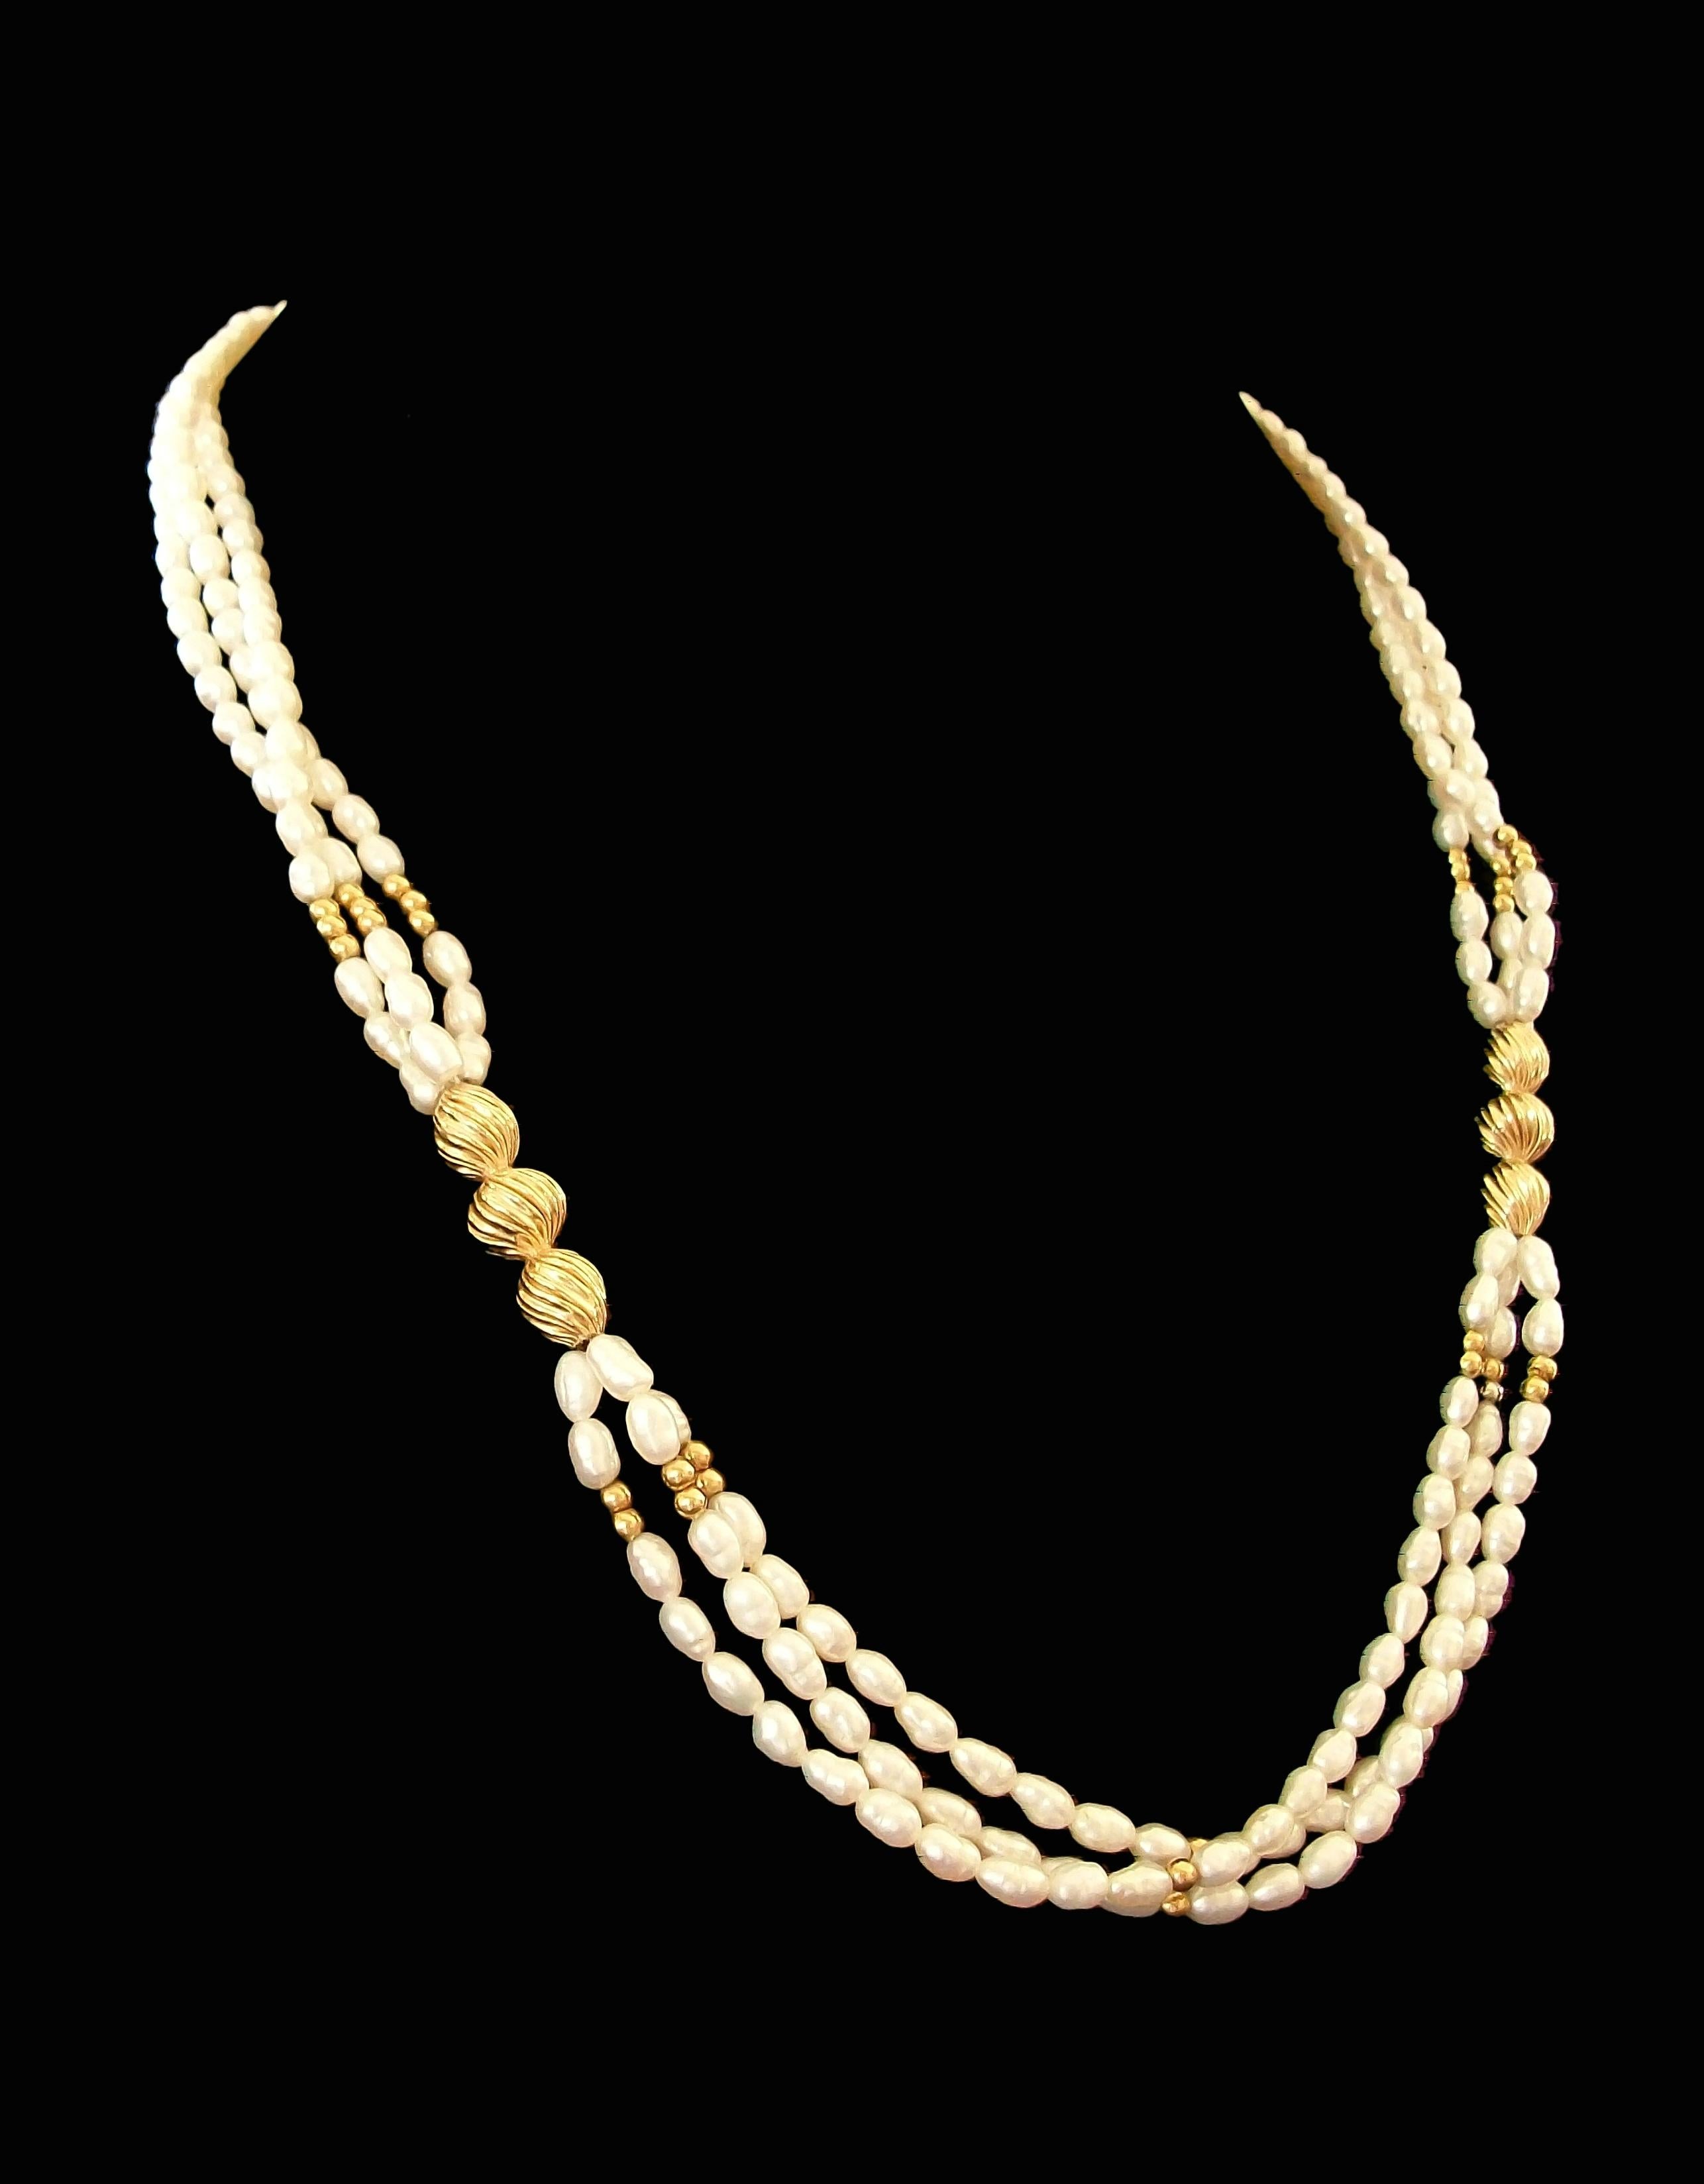 Vintage three strand cultured Keshi Baroque Pearl and 14K yellow gold necklace - fine quality and luster to the pearls - featuring two 14K gold one inch spacers with smaller gold balls throughout - gold ball and hook closure - stamped 14K on the